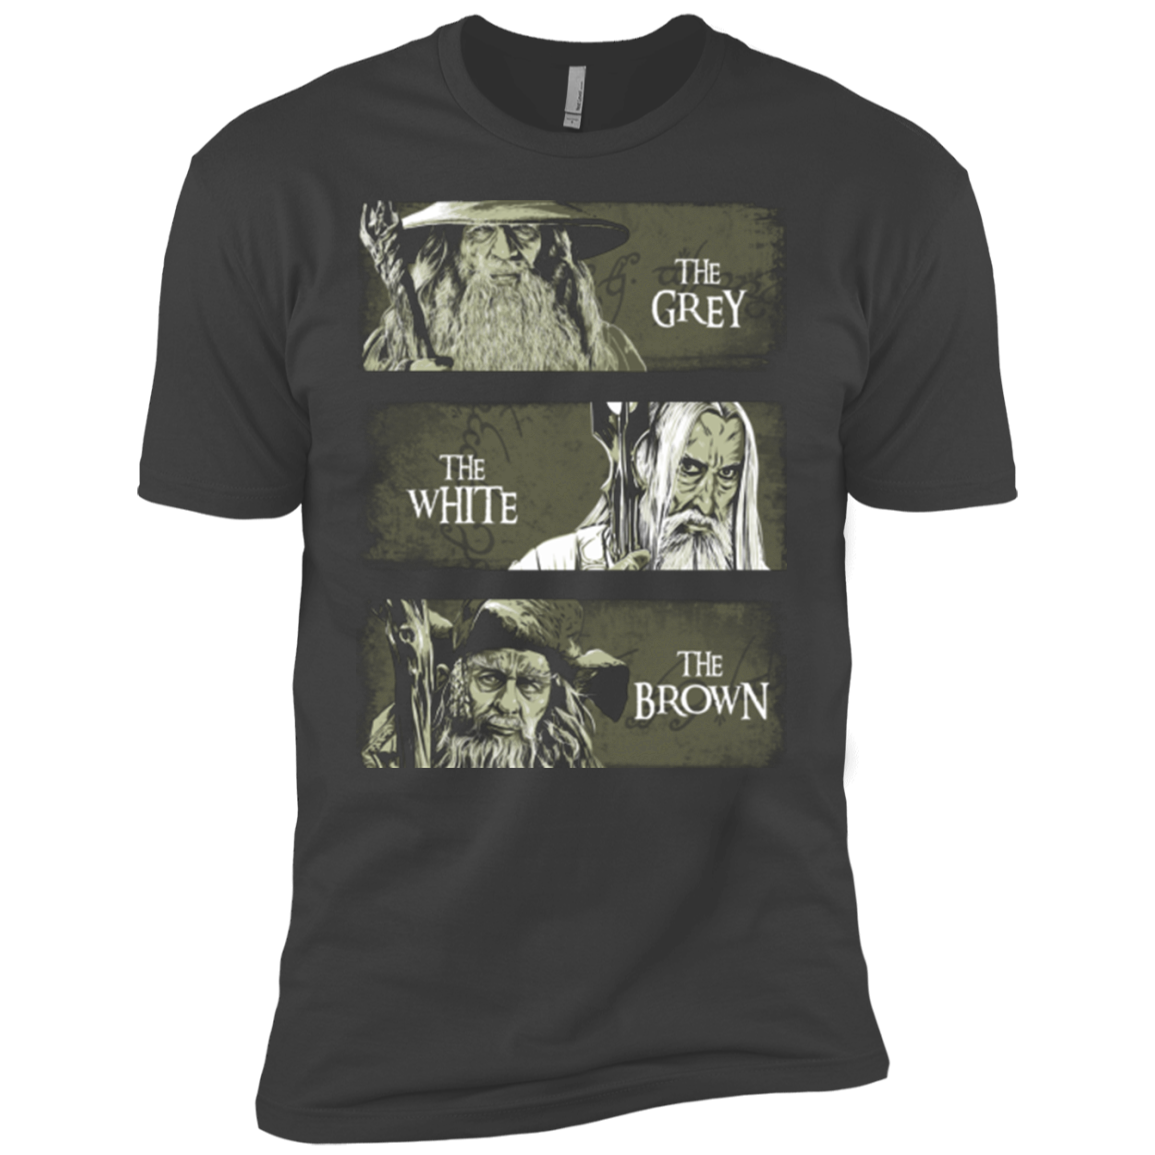 Wizards of Middle Earth Boys Premium T-Shirt